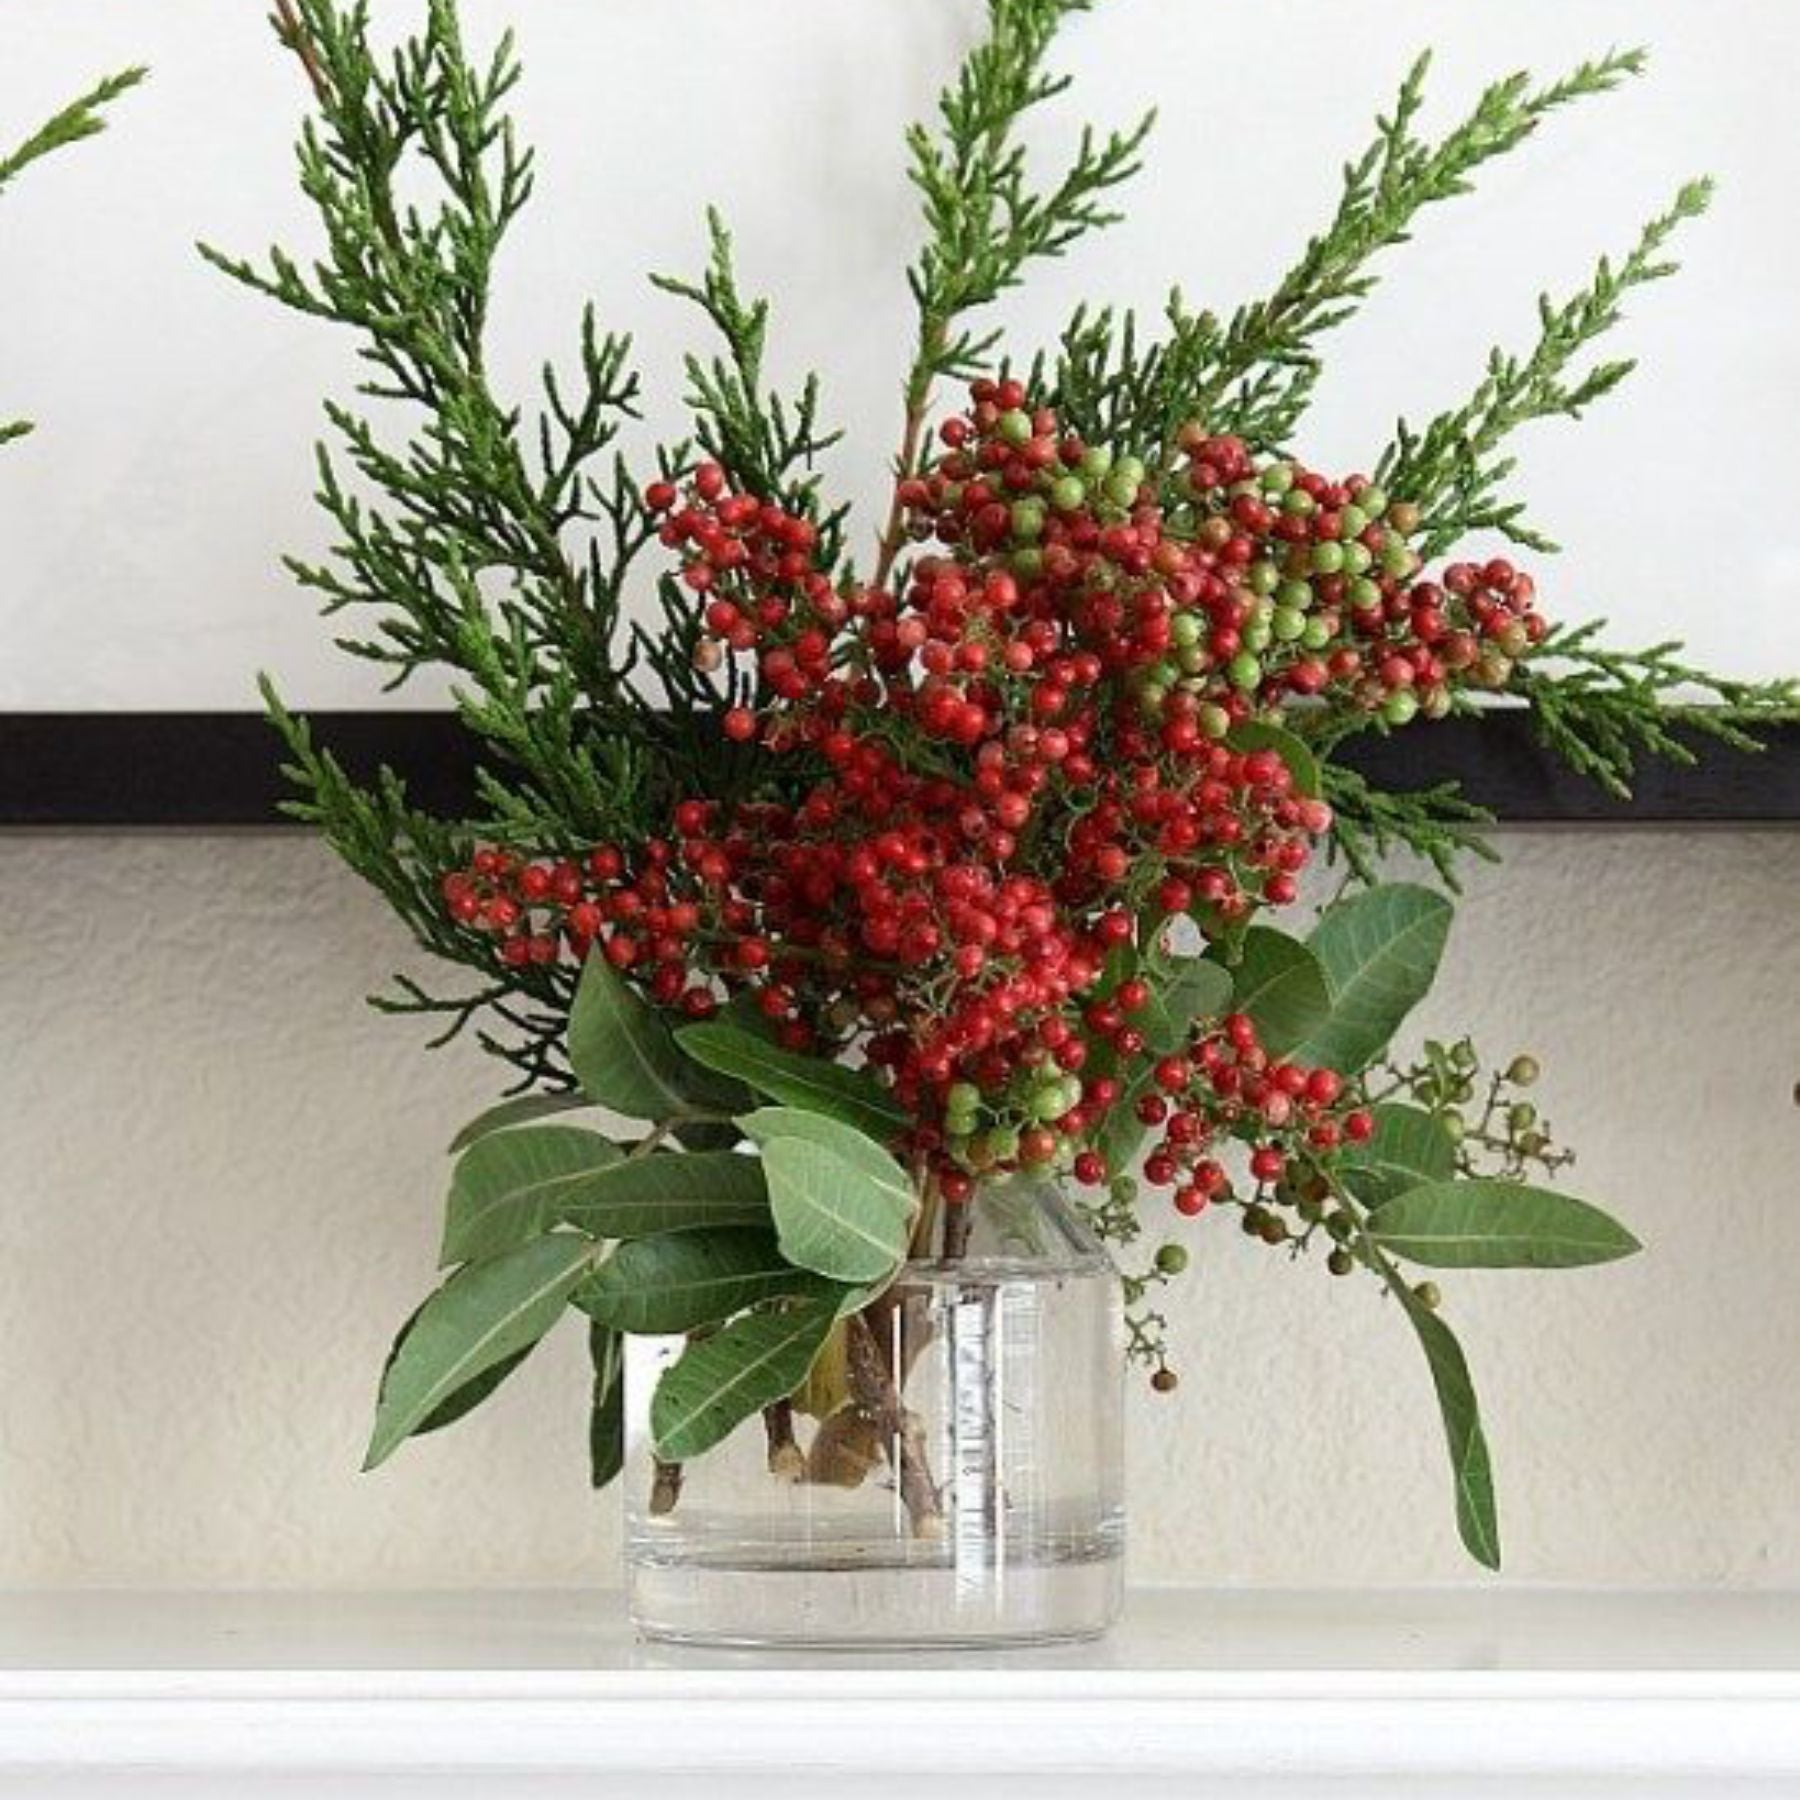 flower arrangements for your holiday decorations